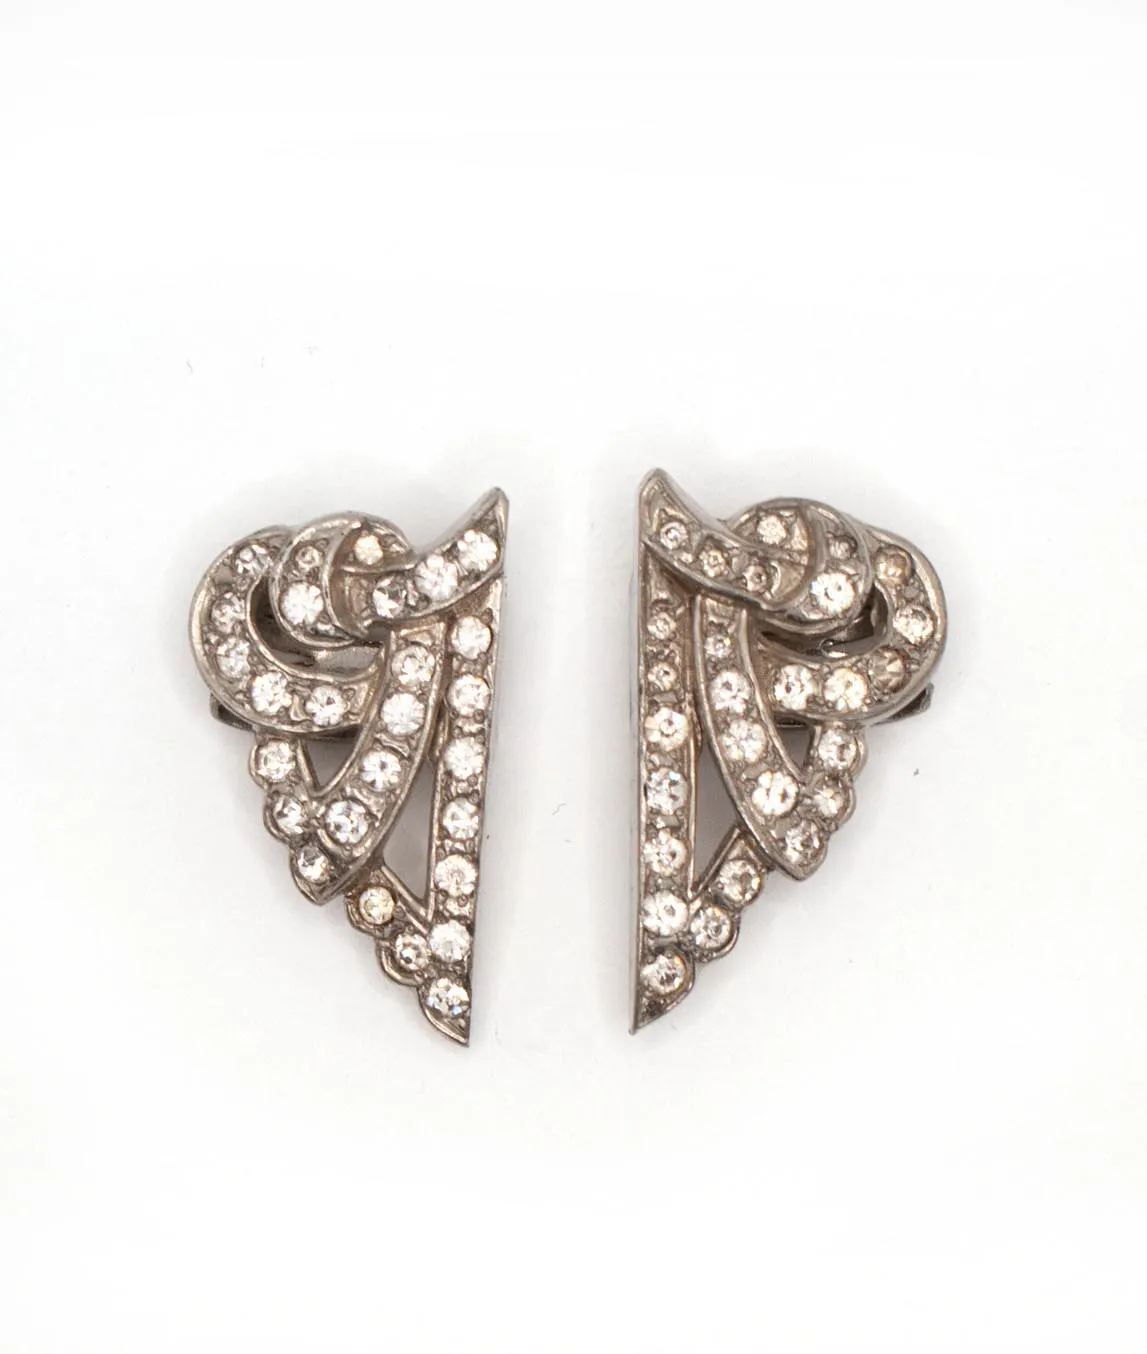 Two dress clips silver tone with clear rhinestones